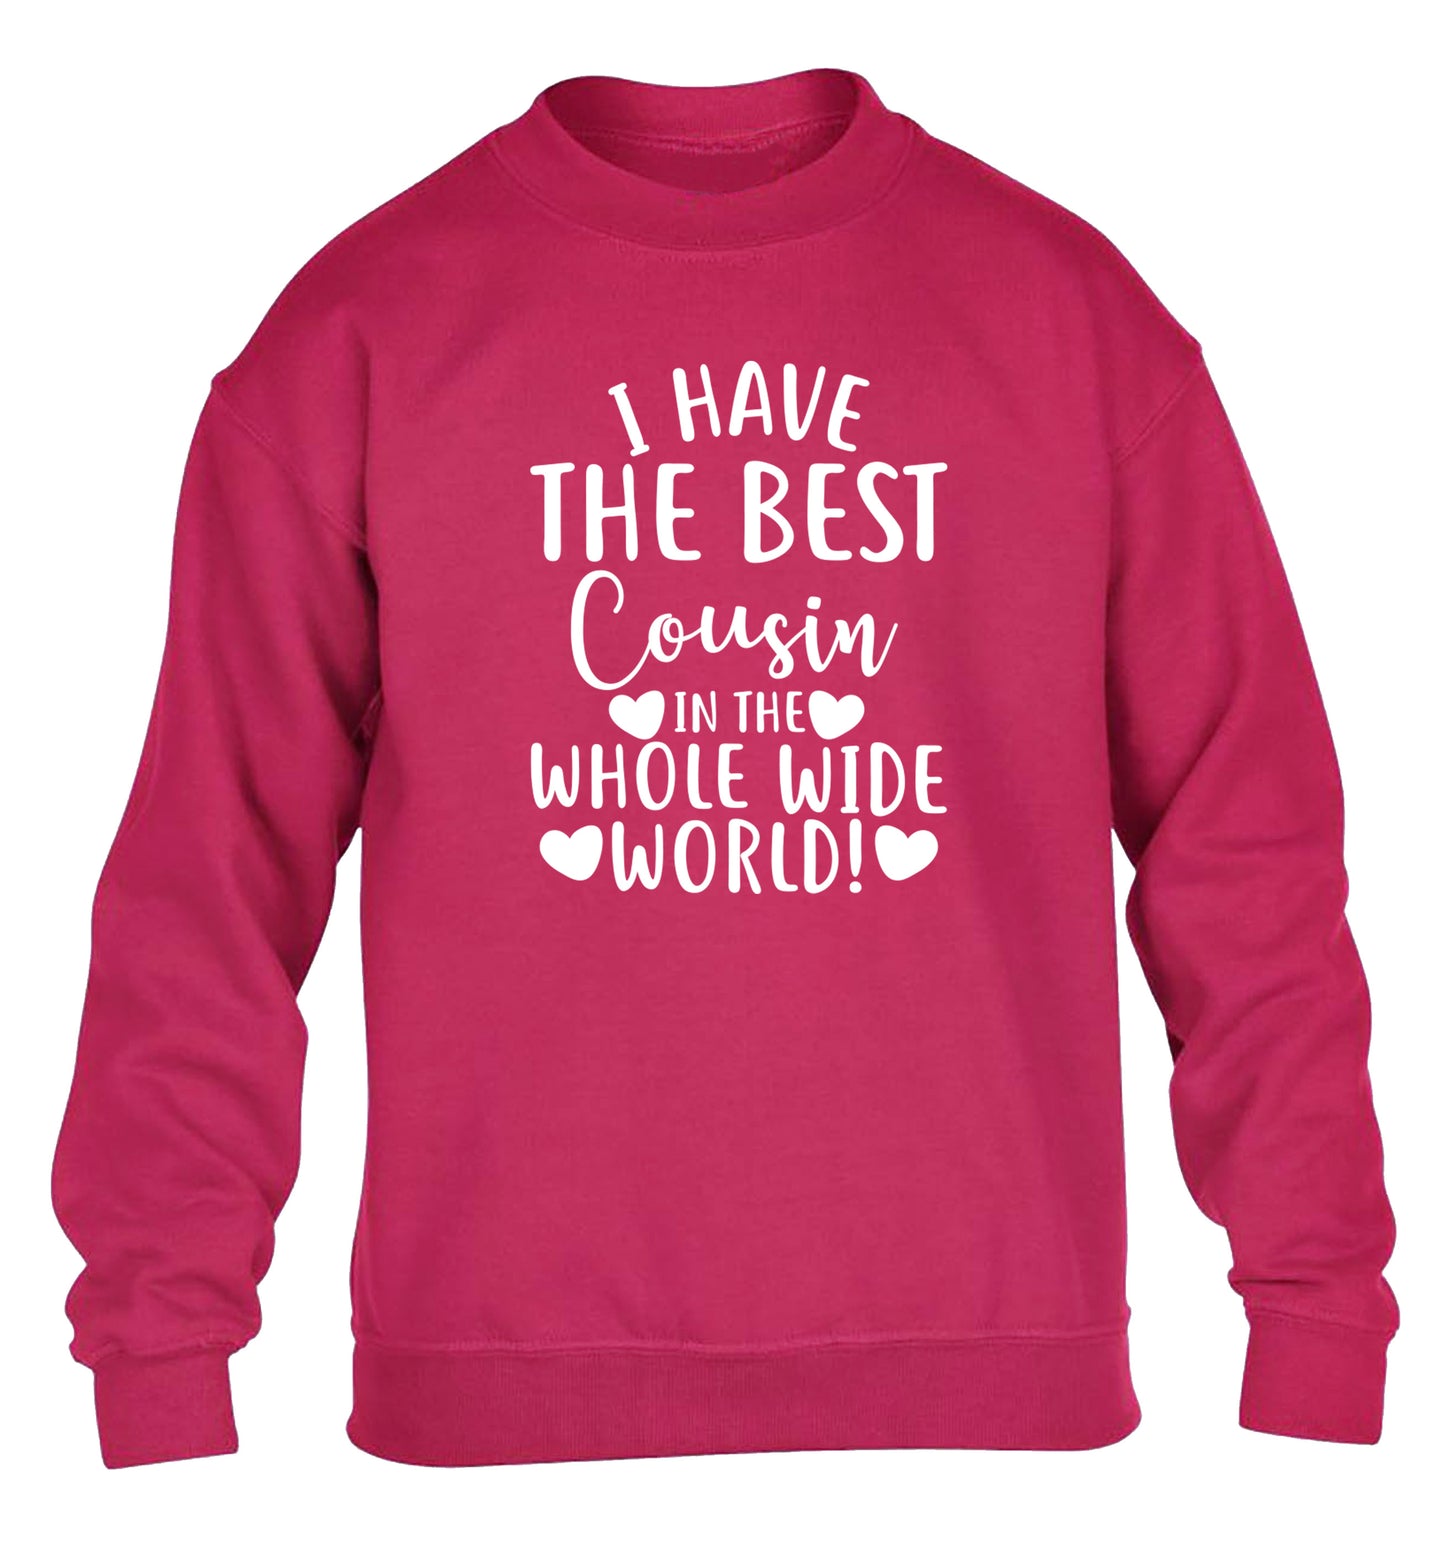 I have the best cousin in the whole wide world! children's pink sweater 12-13 Years